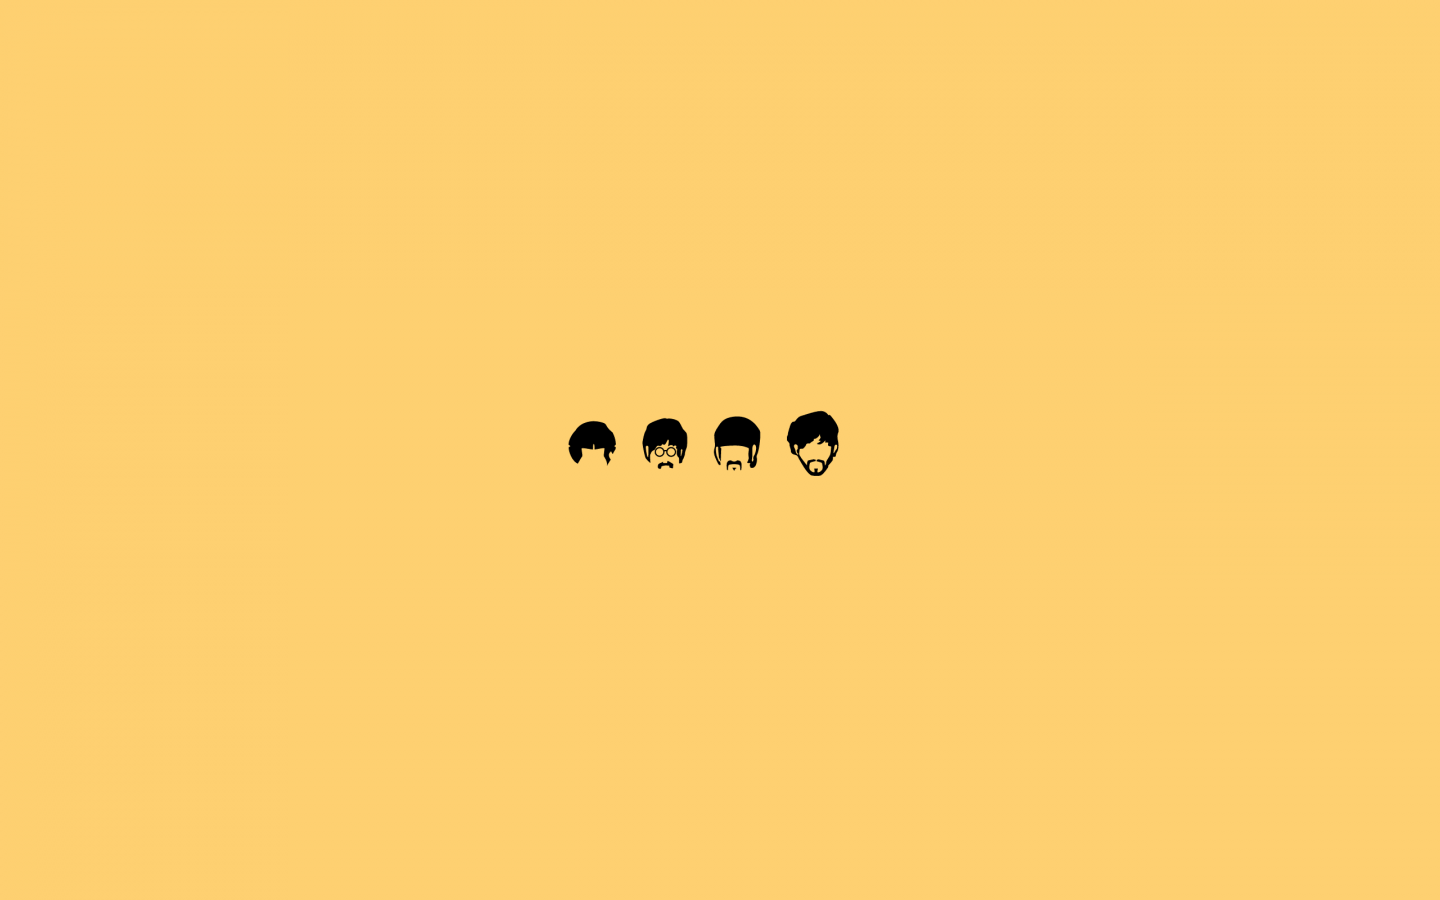 Beatles wallpaper with resolution 1920x1080 pixel. You can use this wallpaper as background for your desktop Computer Screensavers, Android or iPhone smartphones - 1440x900